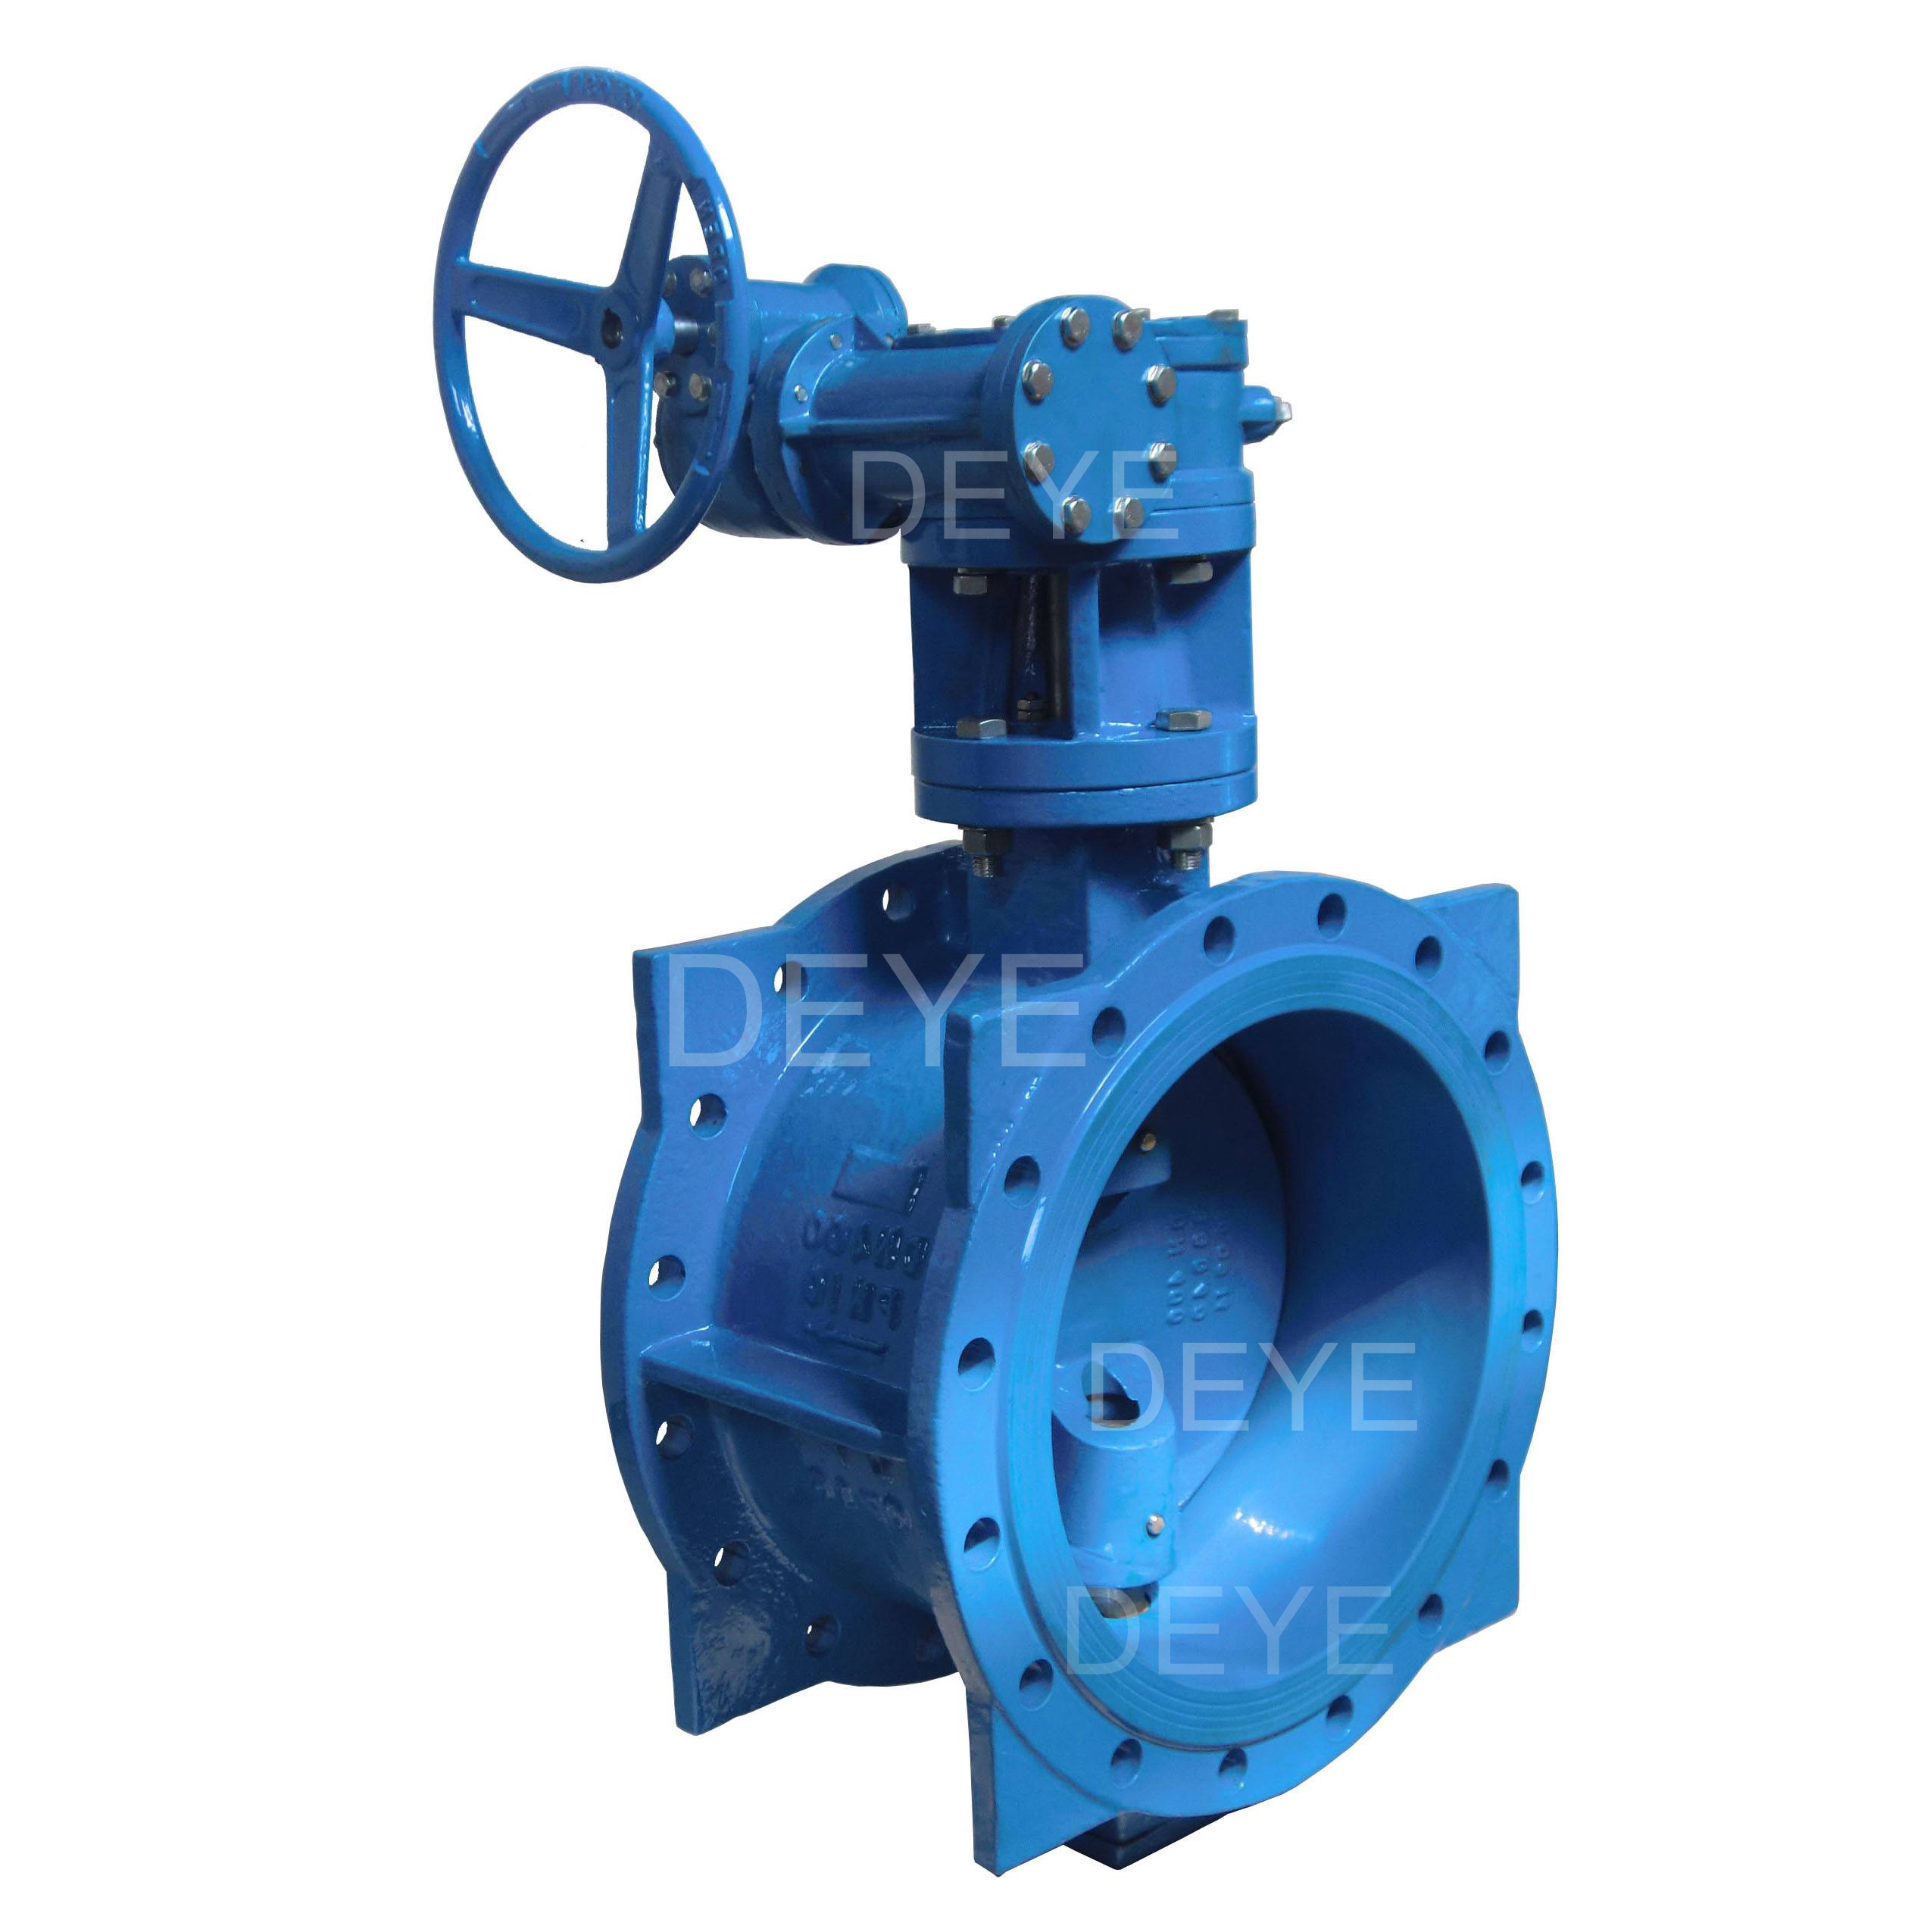 Hot-selling Flanged Y-Strainer -
 GGG50 PN16 PN25  Double Eccentric Butterfly Valves for water pump  - Deye